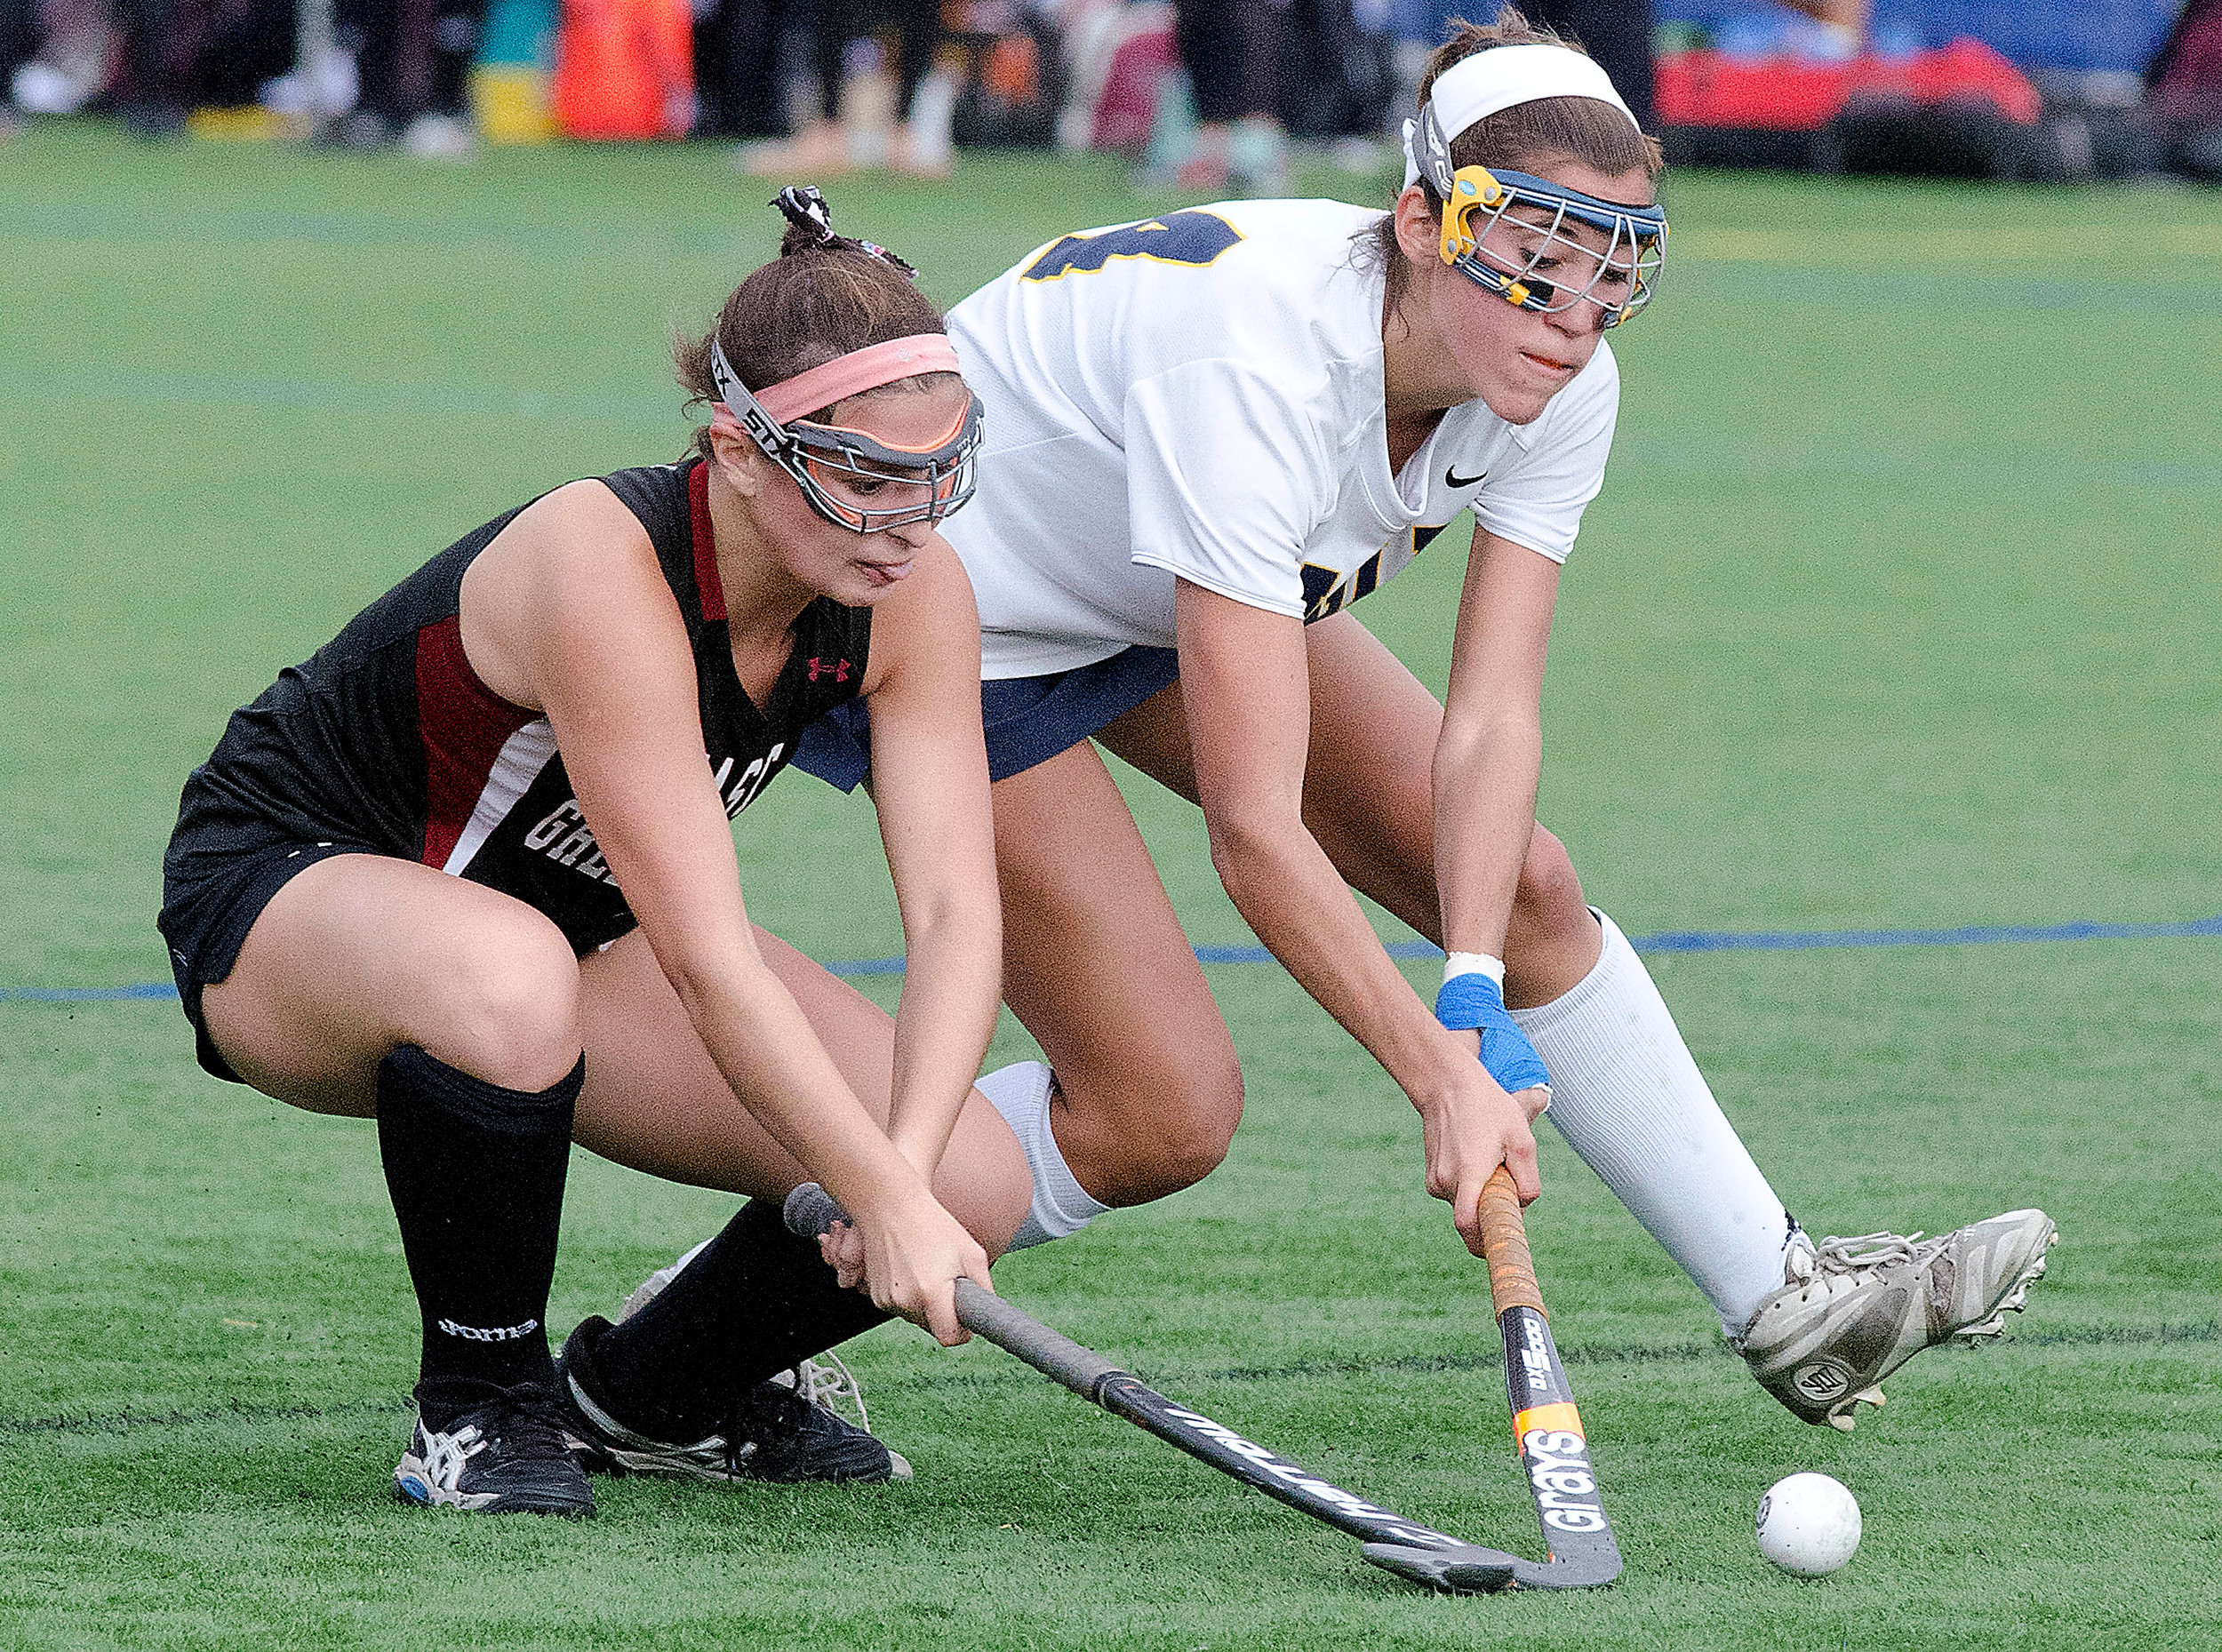 Lily Gagliano makes a play on the ball.